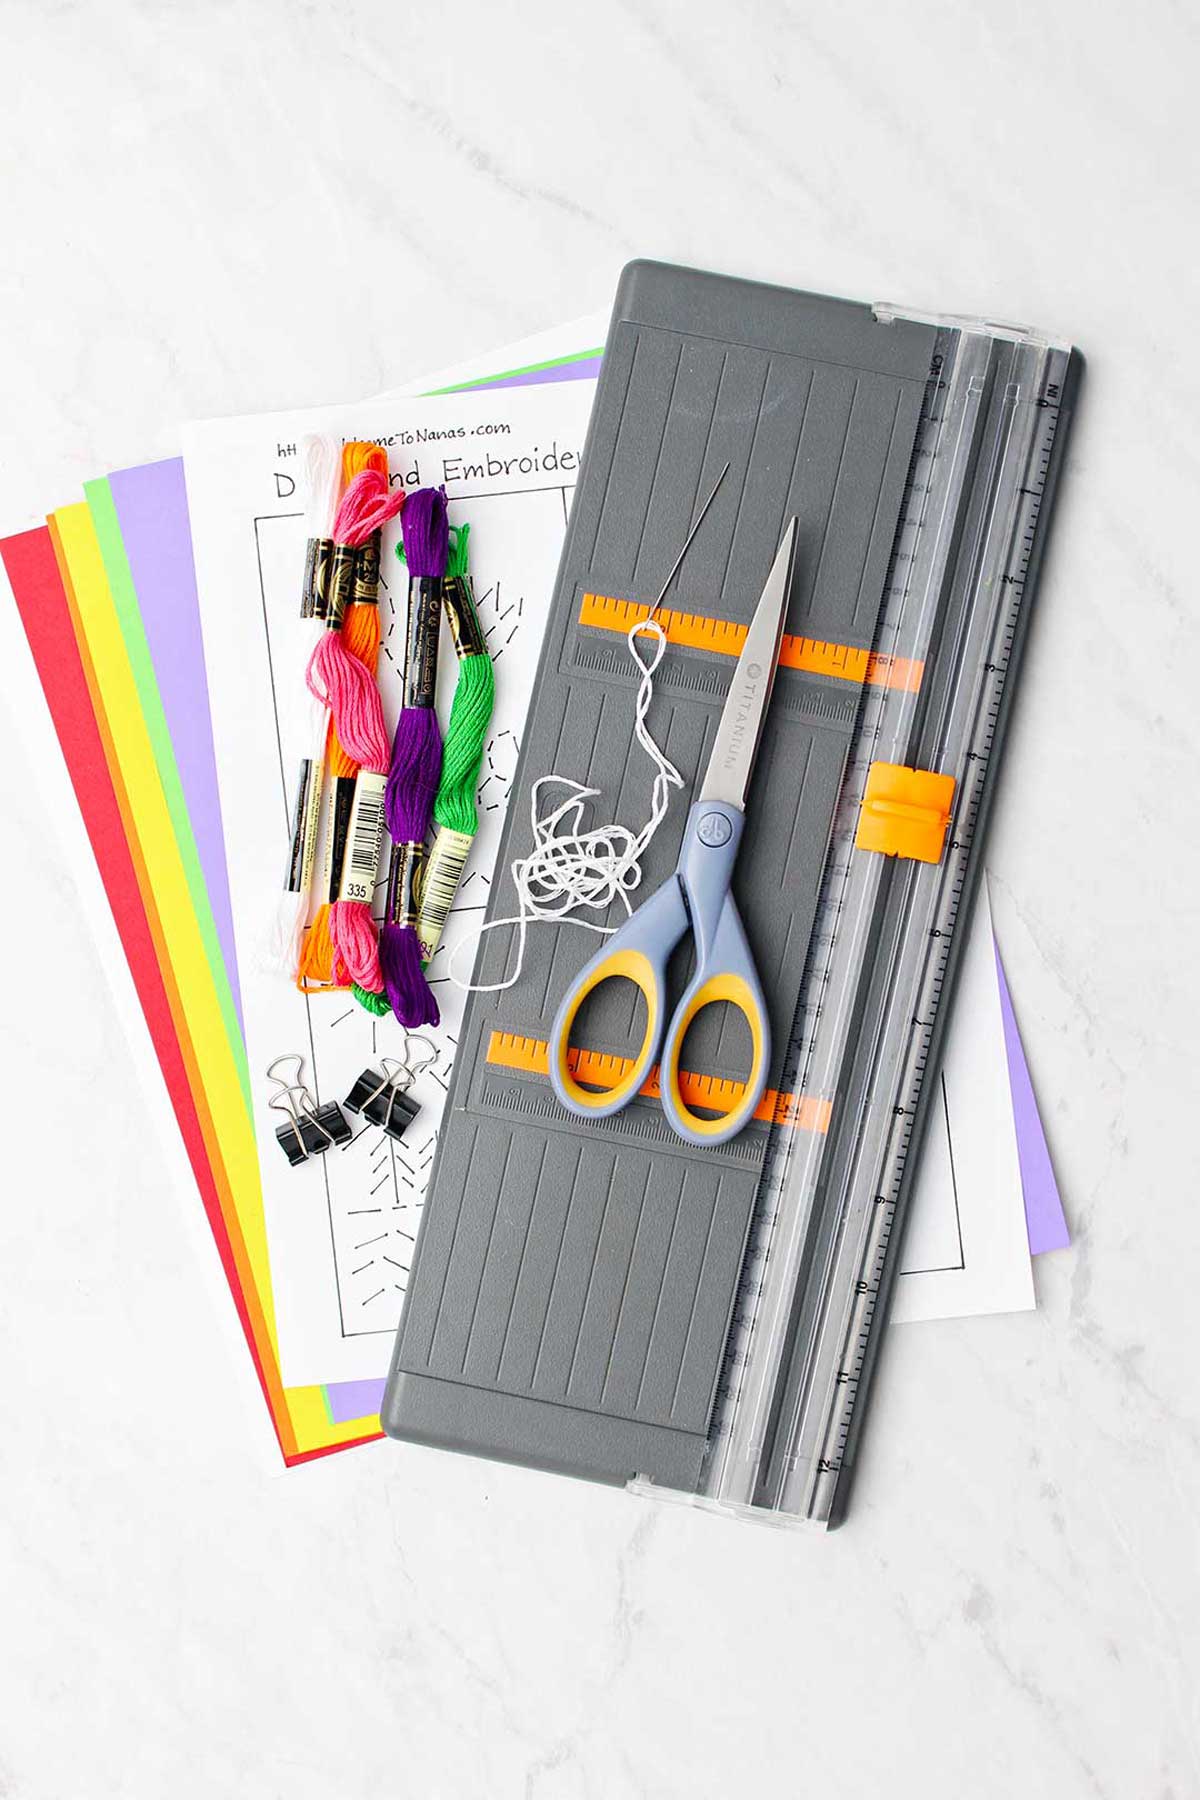 Supplies for hand embroidered card. Colorful embroidery floss, paper, templates, scissors and paper cutter.